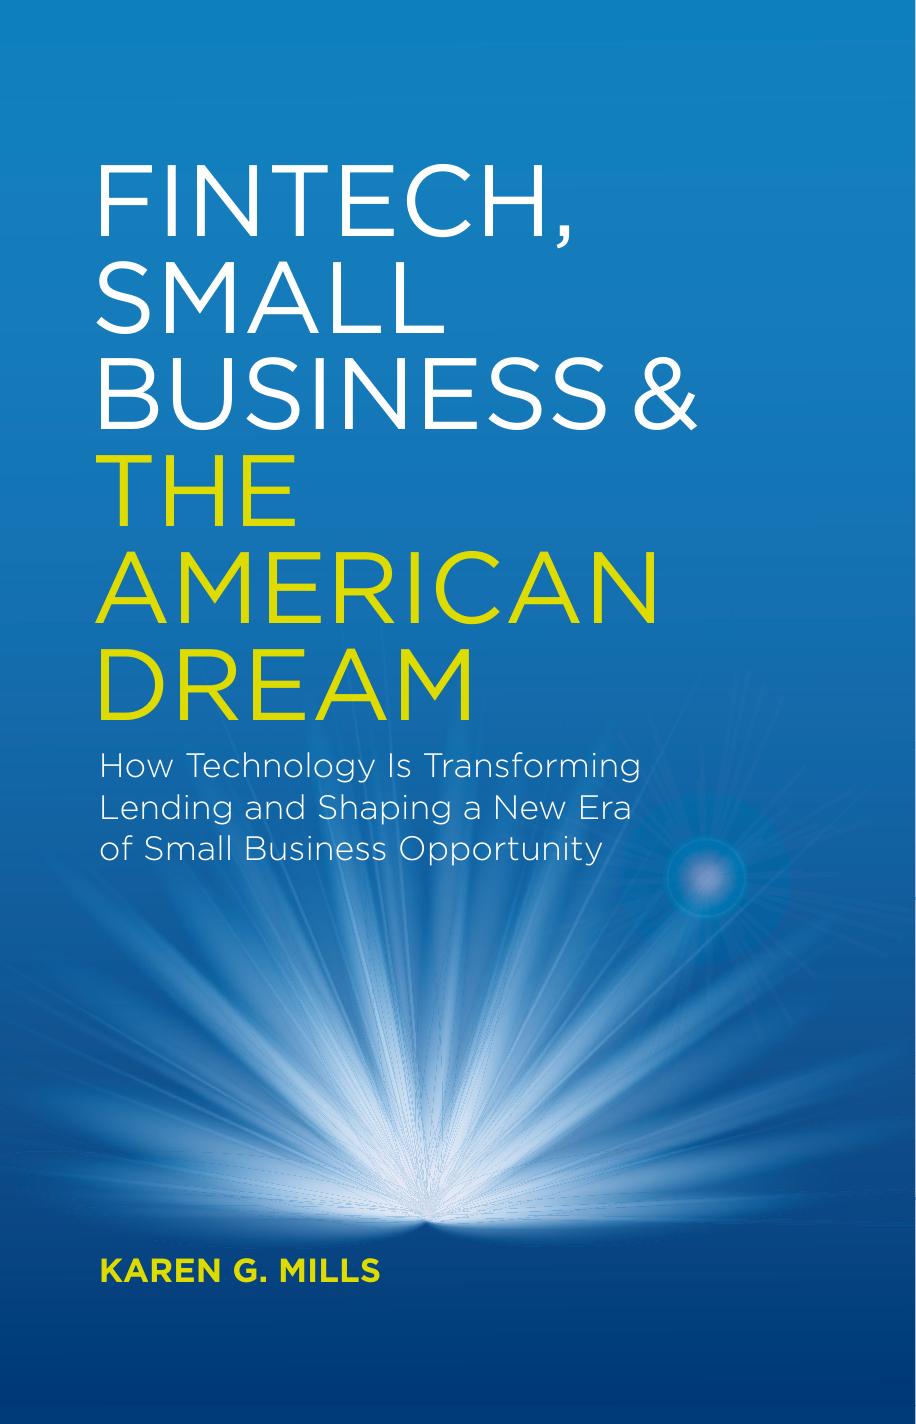 Fintech, Small Business & the American Dream  How Technology Is Transforming Lending and Shaping a New Era of Small Busi 2018